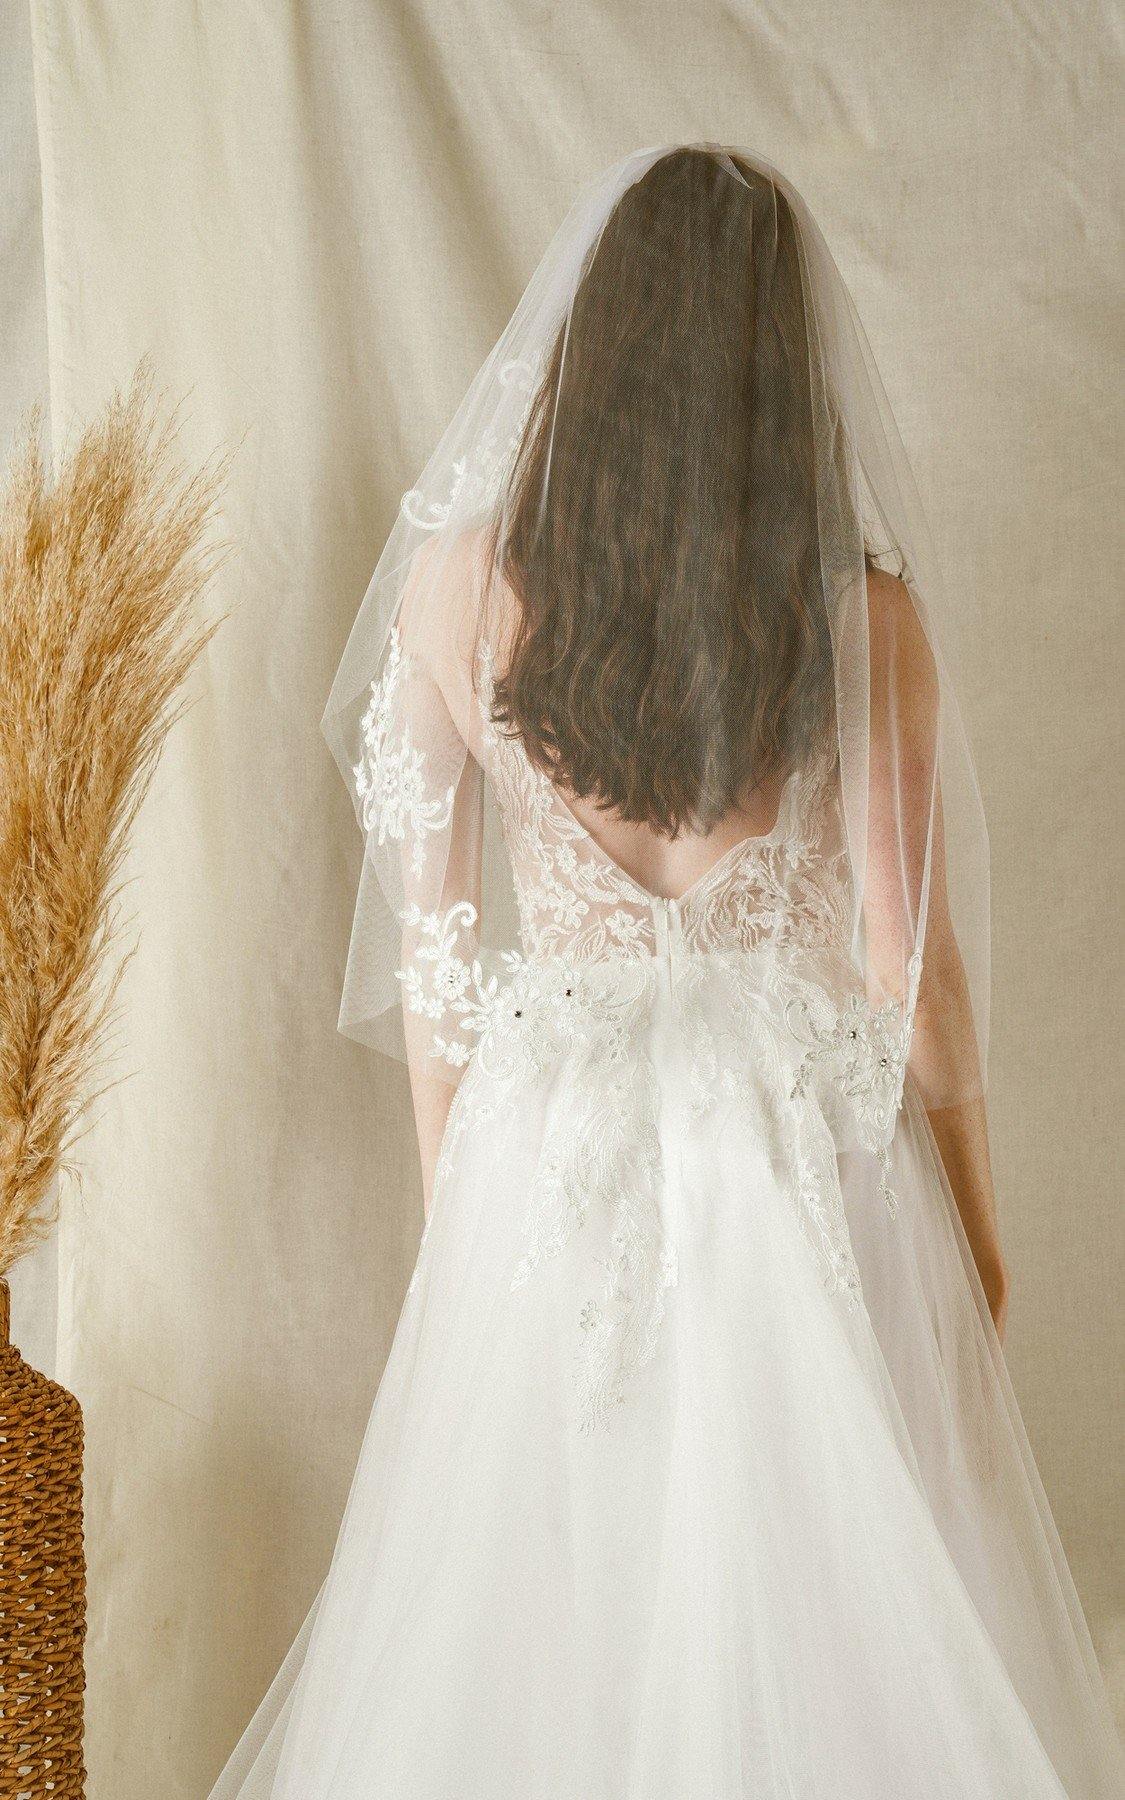 Modest Tulle Short Wedding Veil With Lace Appliques,WV0119